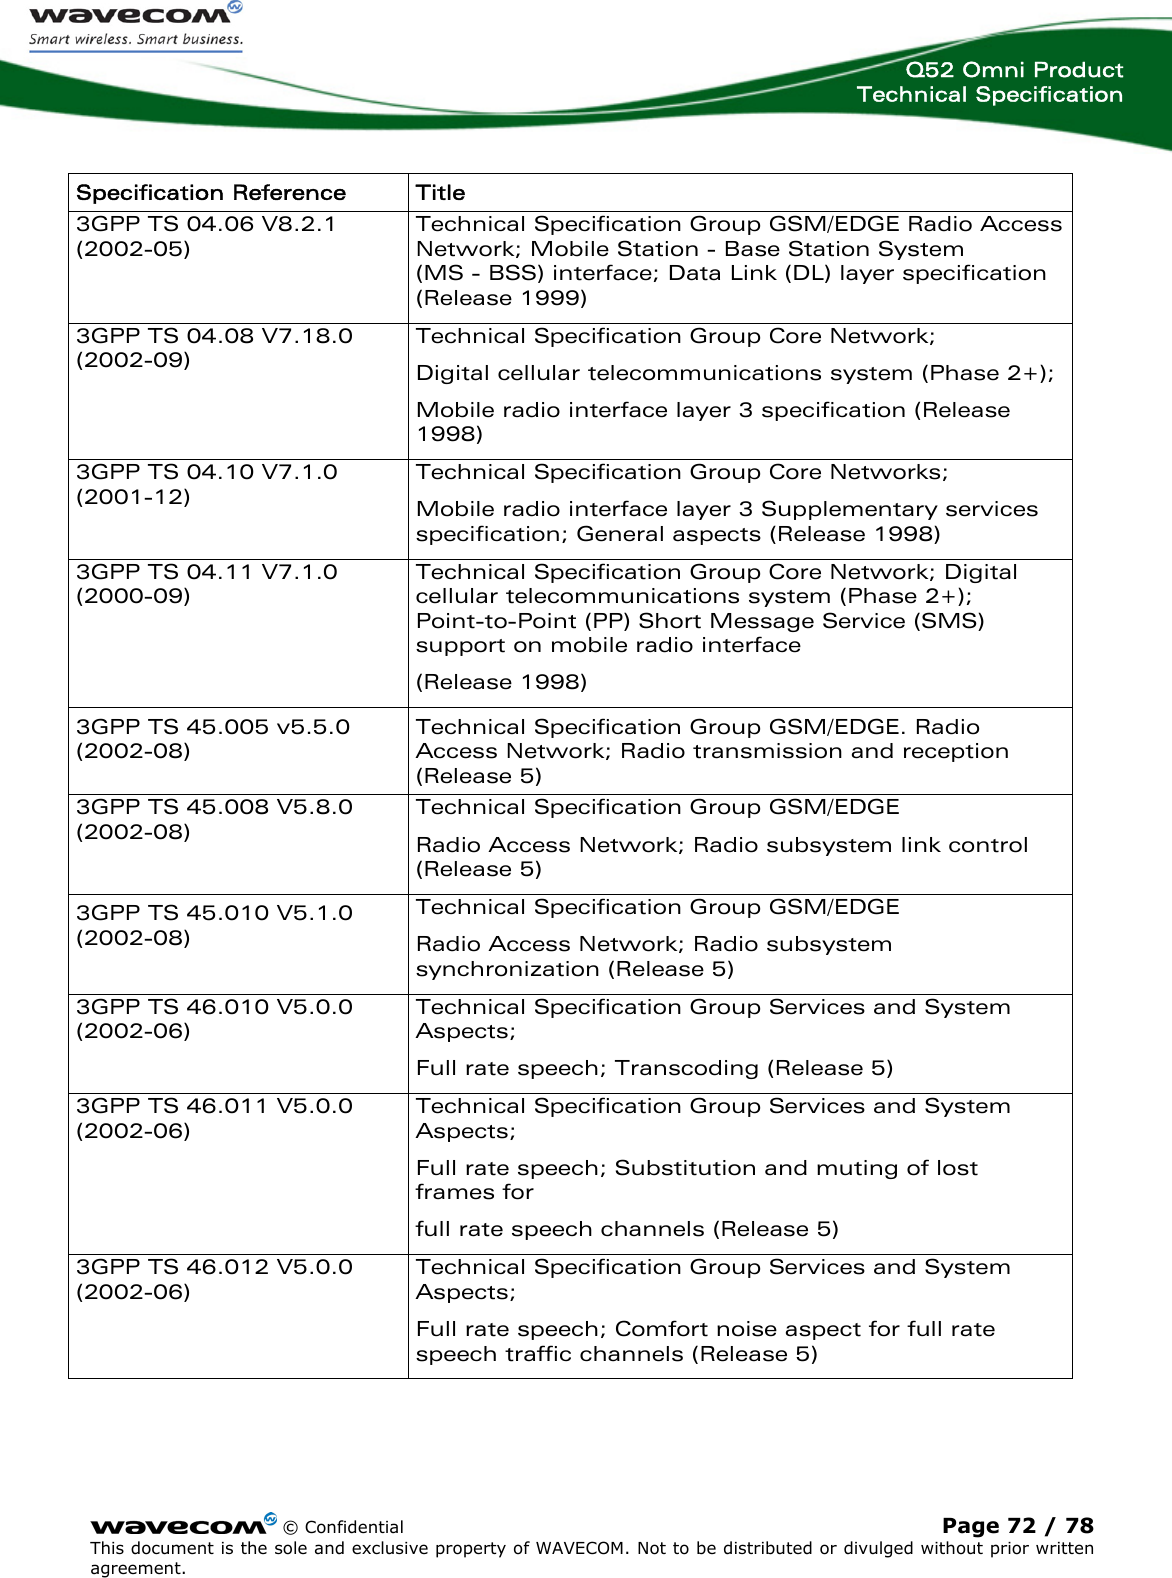  Q52 Omni Product Technical Specification    © Confidential Page 72 / 78 This document is the sole and exclusive property of WAVECOM. Not to be distributed or divulged without prior written agreement.   Specification Reference  Title 3GPP TS 04.06 V8.2.1 (2002-05) Technical Specification Group GSM/EDGE Radio Access Network; Mobile Station - Base Station System  (MS - BSS) interface; Data Link (DL) layer specification (Release 1999) 3GPP TS 04.08 V7.18.0 (2002-09) Technical Specification Group Core Network; Digital cellular telecommunications system (Phase 2+); Mobile radio interface layer 3 specification (Release 1998) 3GPP TS 04.10 V7.1.0 (2001-12)  Technical Specification Group Core Networks; Mobile radio interface layer 3 Supplementary services specification; General aspects (Release 1998) 3GPP TS 04.11 V7.1.0 (2000-09) Technical Specification Group Core Network; Digital cellular telecommunications system (Phase 2+); Point-to-Point (PP) Short Message Service (SMS) support on mobile radio interface (Release 1998) 3GPP TS 45.005 v5.5.0 (2002-08)  Technical Specification Group GSM/EDGE. Radio Access Network; Radio transmission and reception (Release 5) 3GPP TS 45.008 V5.8.0 (2002-08) Technical Specification Group GSM/EDGE Radio Access Network; Radio subsystem link control (Release 5) 3GPP TS 45.010 V5.1.0 (2002-08) Technical Specification Group GSM/EDGE Radio Access Network; Radio subsystem synchronization (Release 5) 3GPP TS 46.010 V5.0.0 (2002-06) Technical Specification Group Services and System Aspects; Full rate speech; Transcoding (Release 5) 3GPP TS 46.011 V5.0.0 (2002-06) Technical Specification Group Services and System Aspects; Full rate speech; Substitution and muting of lost frames for full rate speech channels (Release 5) 3GPP TS 46.012 V5.0.0 (2002-06) Technical Specification Group Services and System Aspects; Full rate speech; Comfort noise aspect for full rate speech traffic channels (Release 5) 